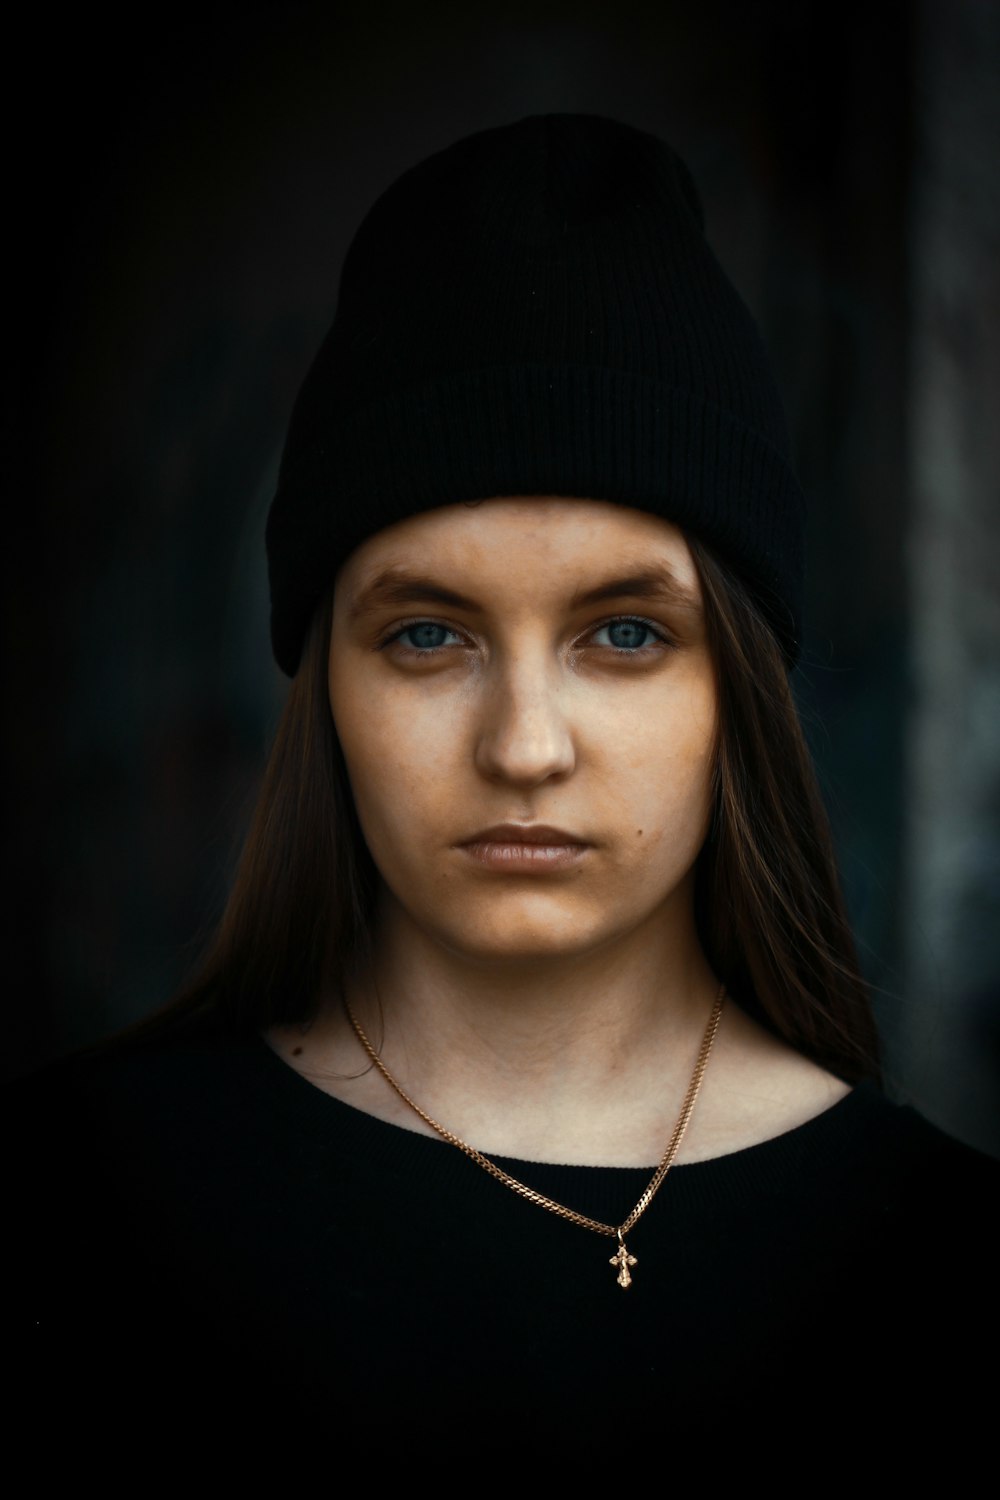 woman in black shirt wearing black beanie and gold-colored necklace with pendant